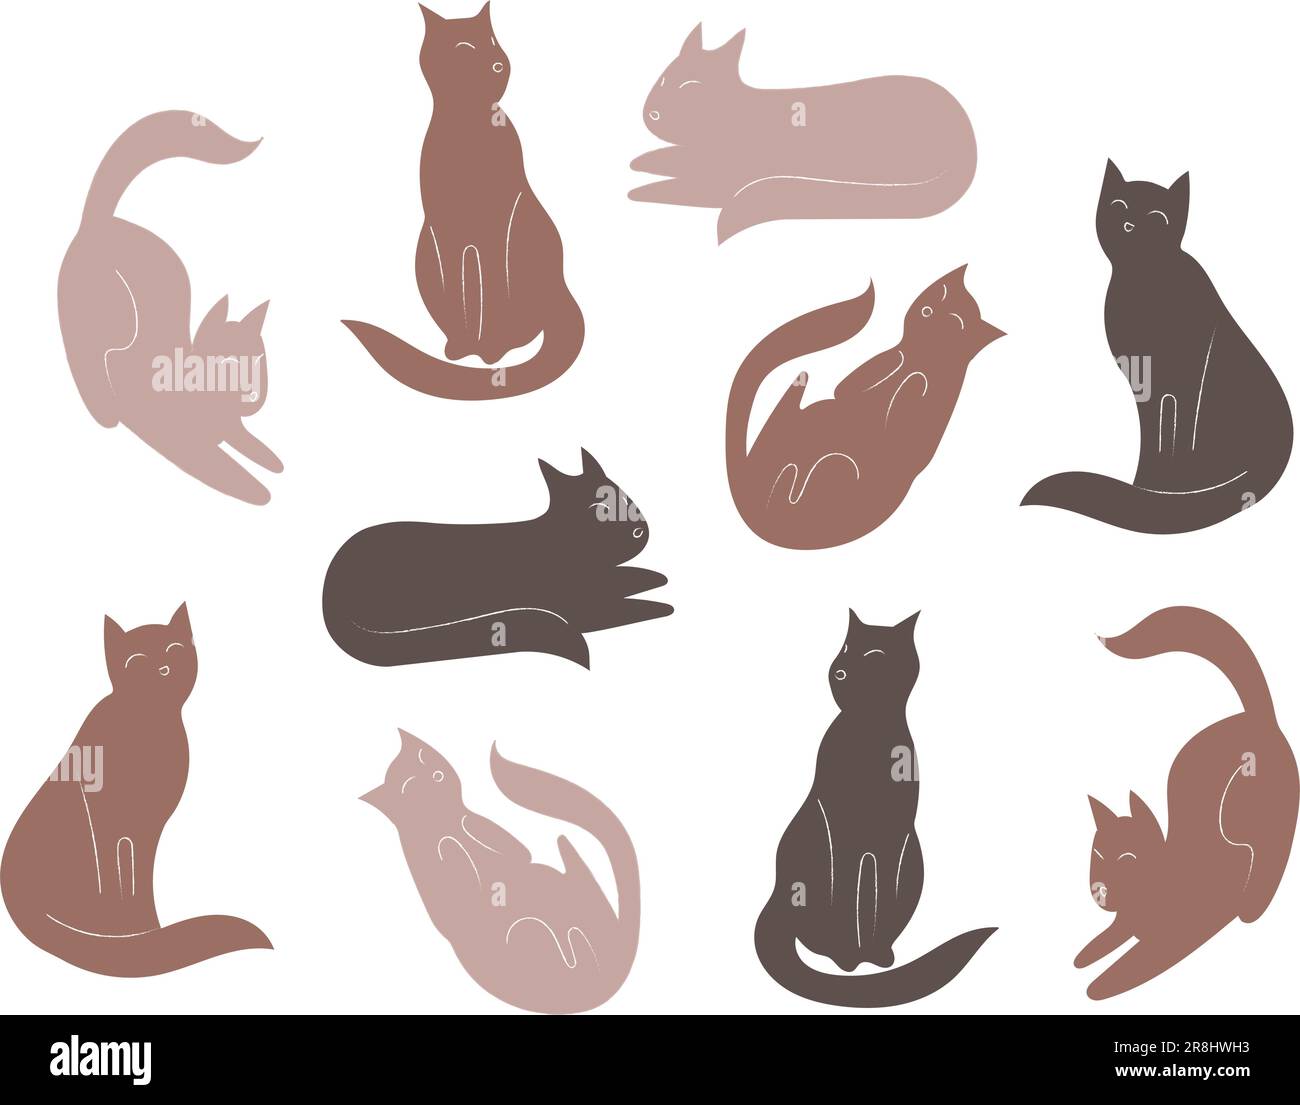 Set of cat characters. Cute icons for design. Vector illustration Stock Vector